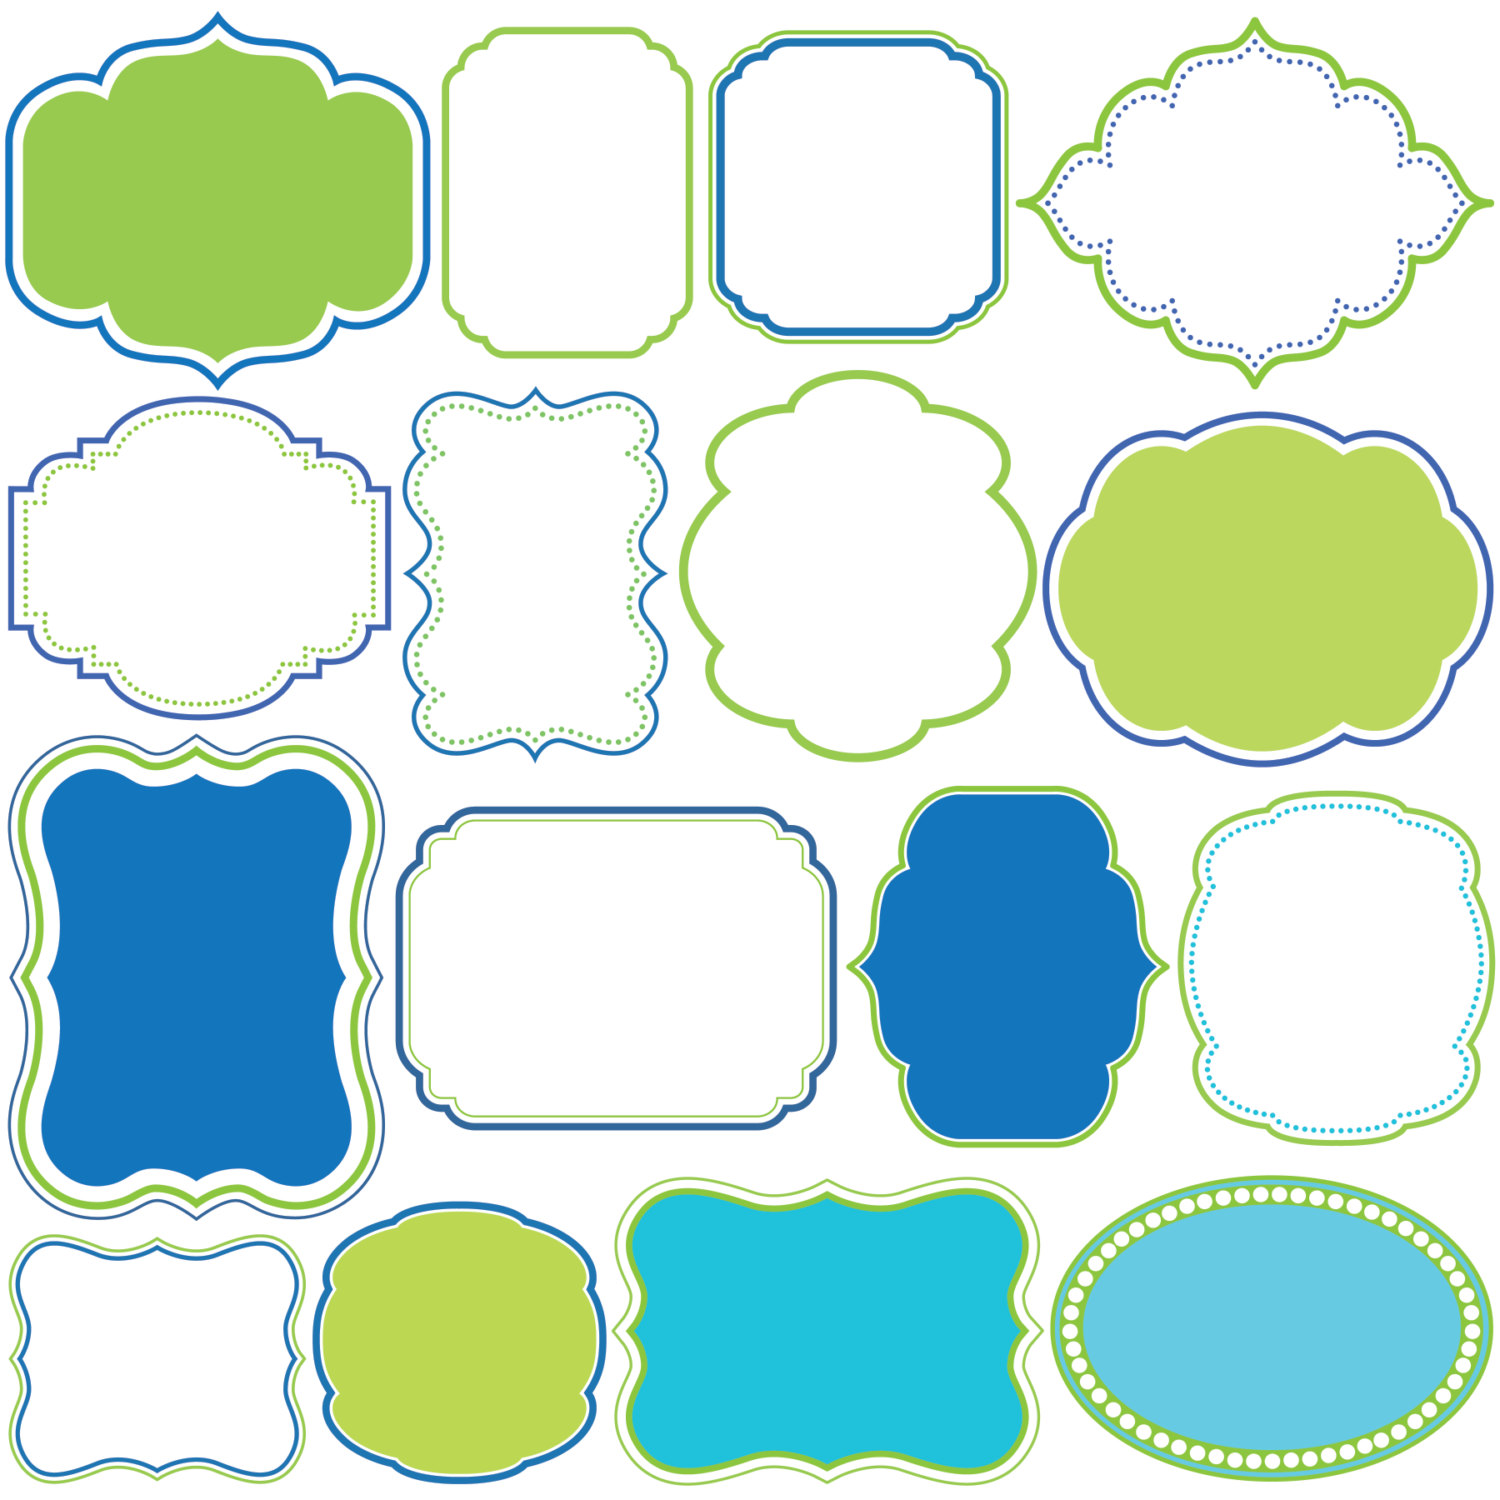 Popular items for green clipart on Etsy